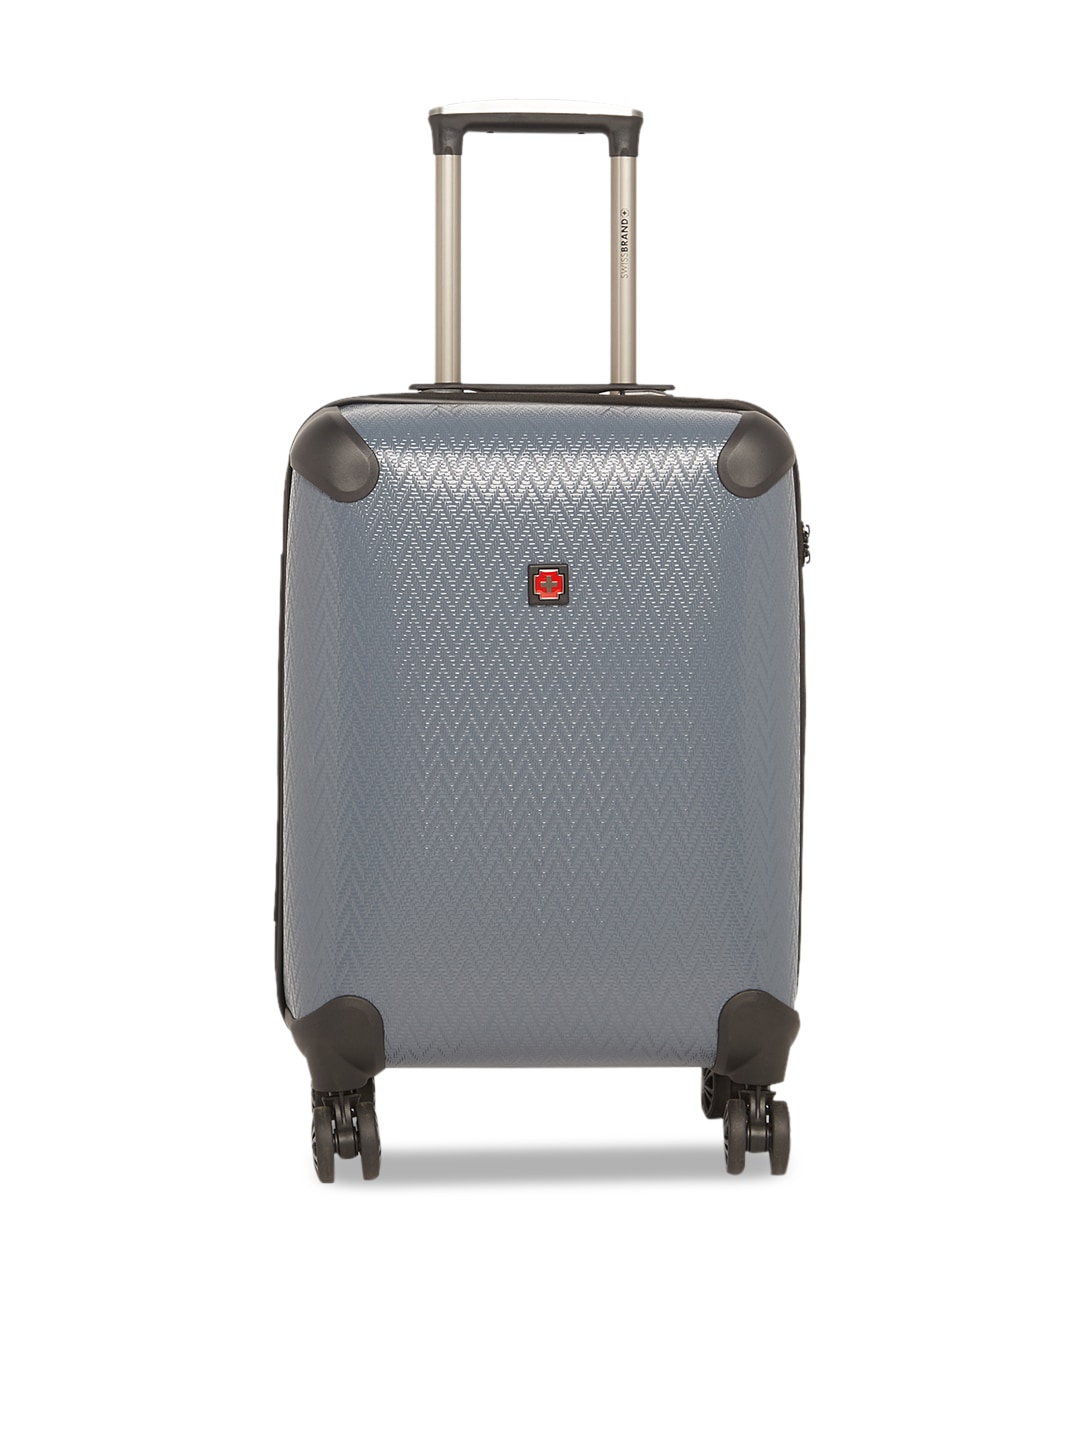 SWISS BRAND Grey Textured ETOY Hard-Sided Cabin Trolley Suitcase Price in India